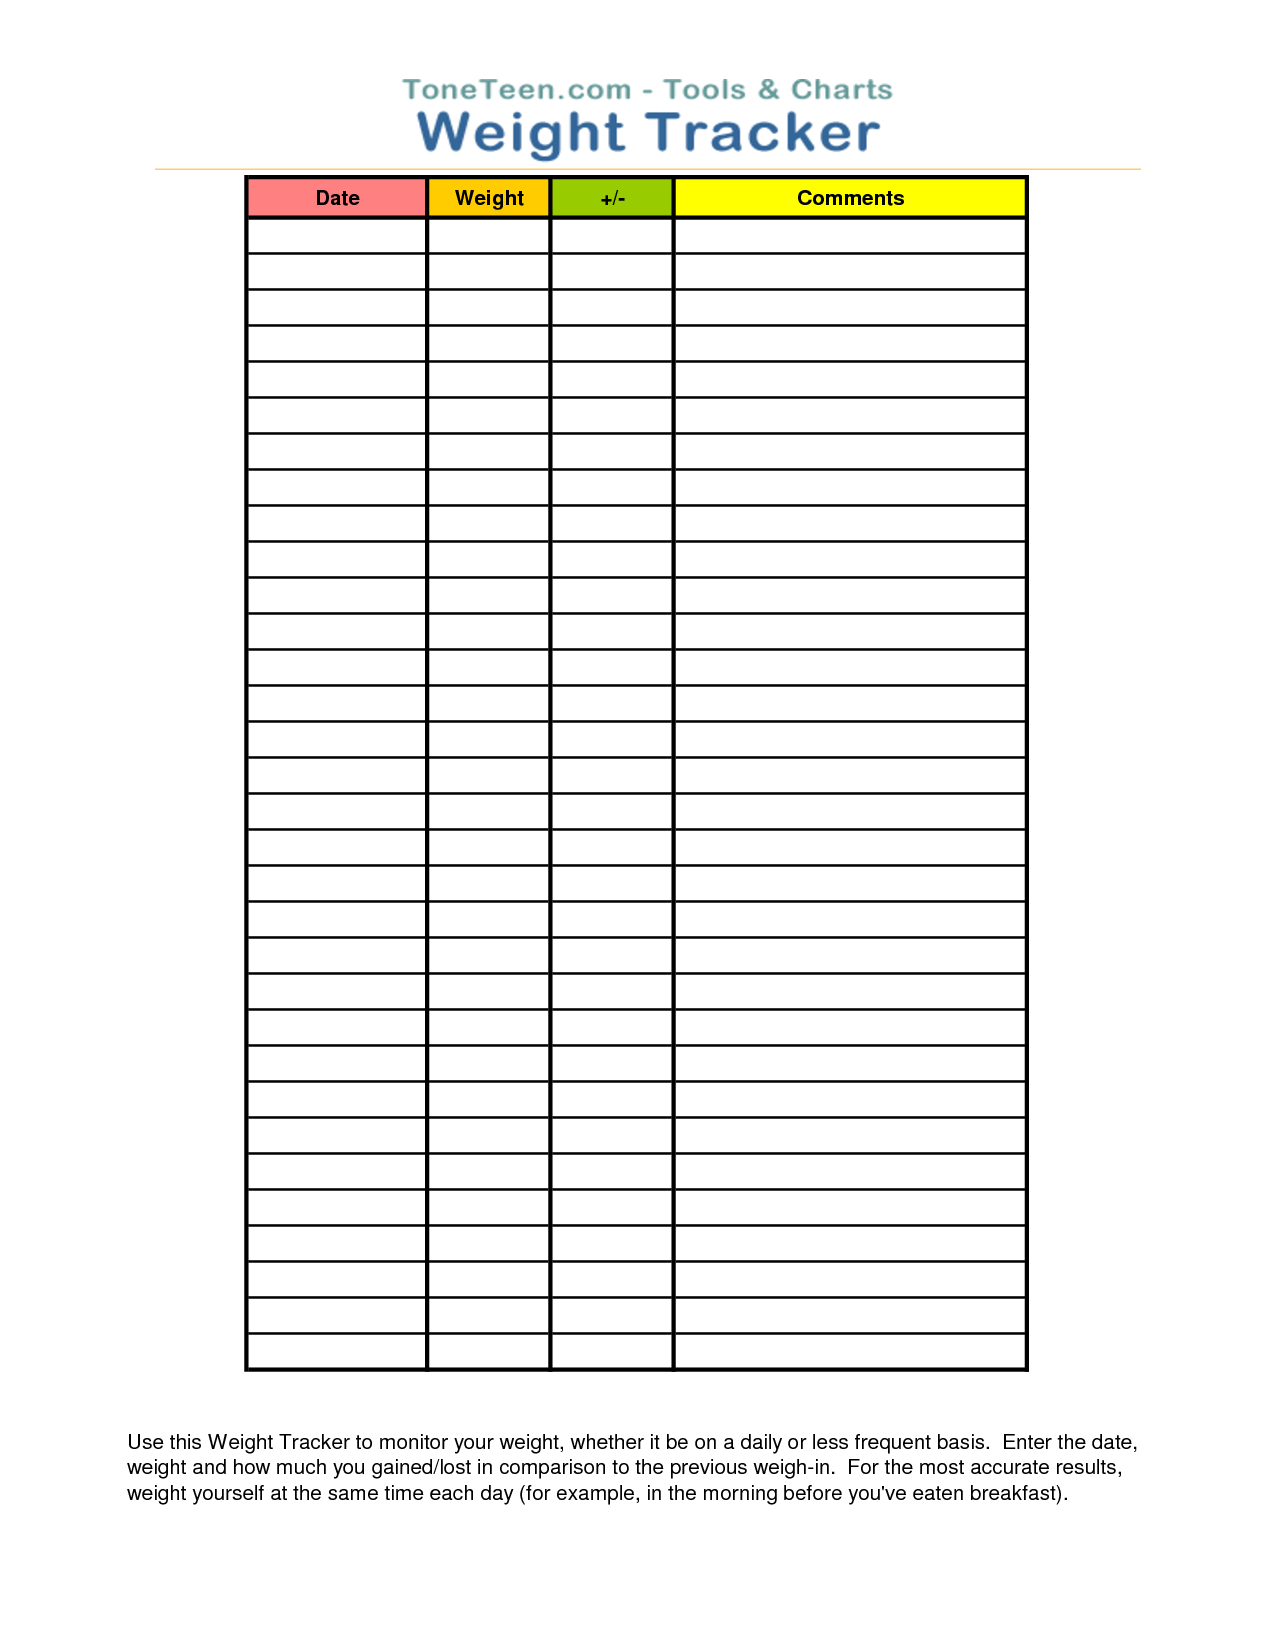 Free Printable Weight Loss Log | Toneteen Weight Tracker - Free Printable Weight Loss Chart